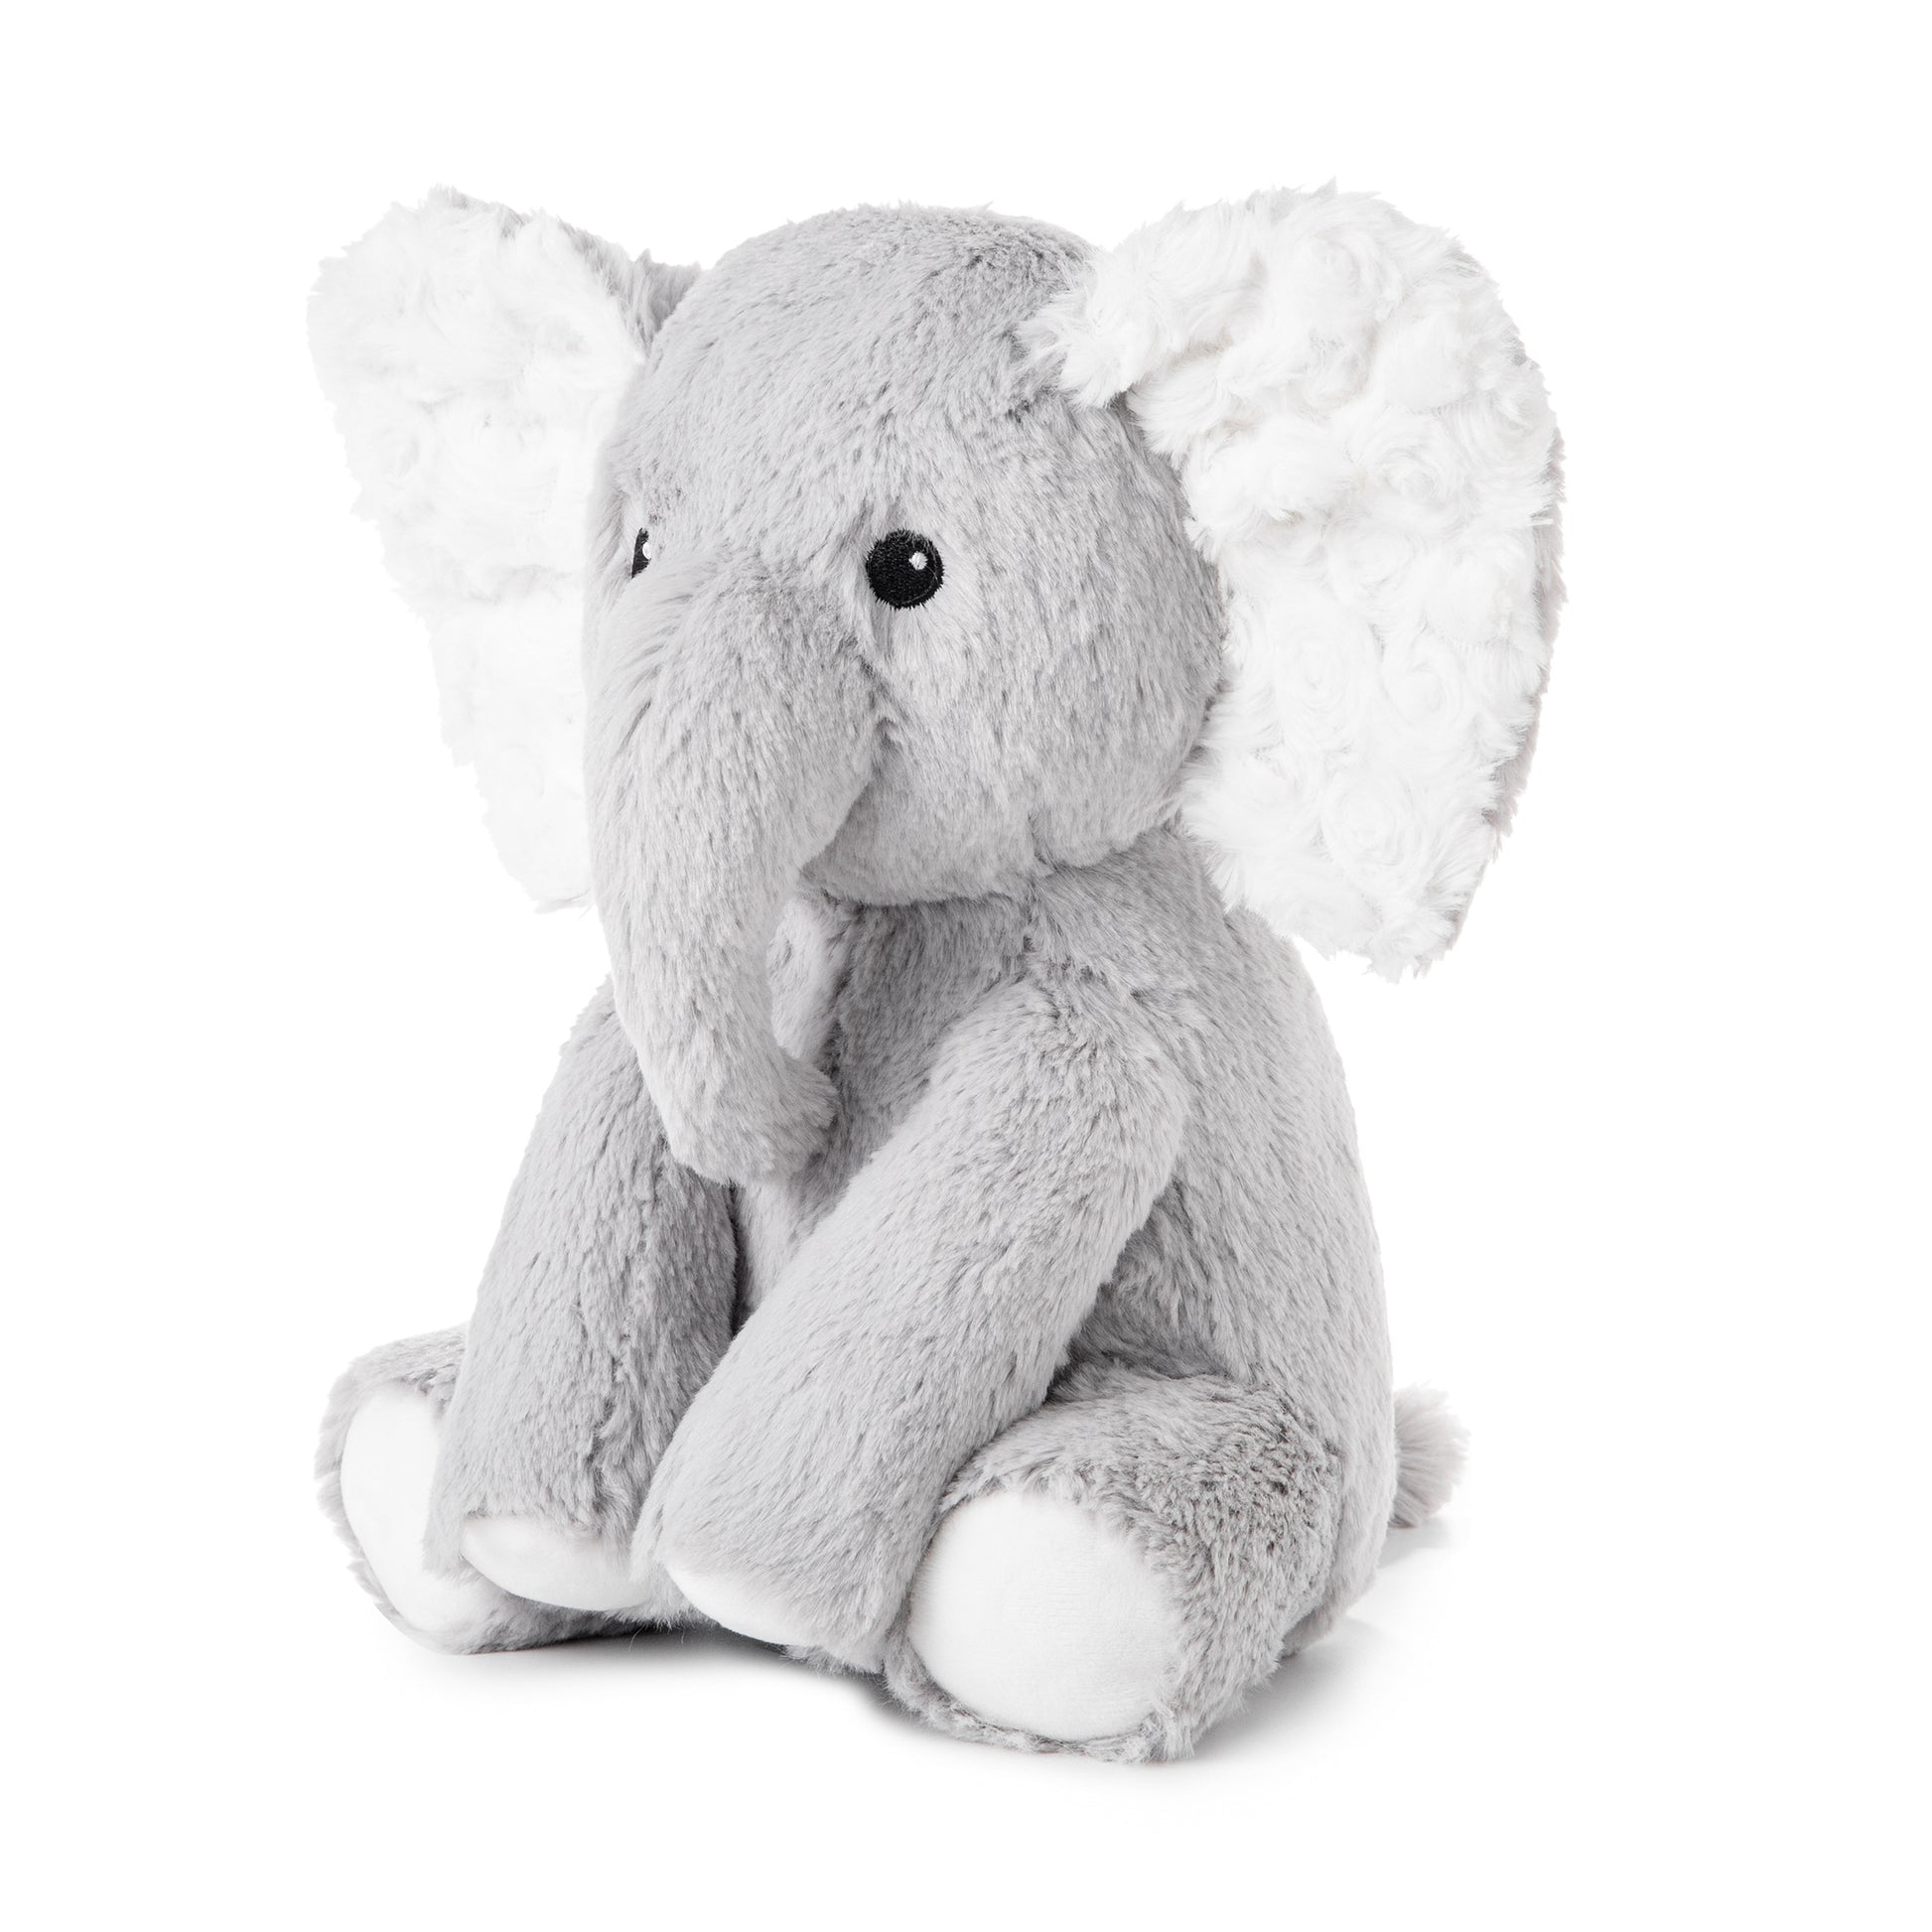 Elliot The Elephant - Soothing Sound Machine-Cloud B-Do-Gree Generations